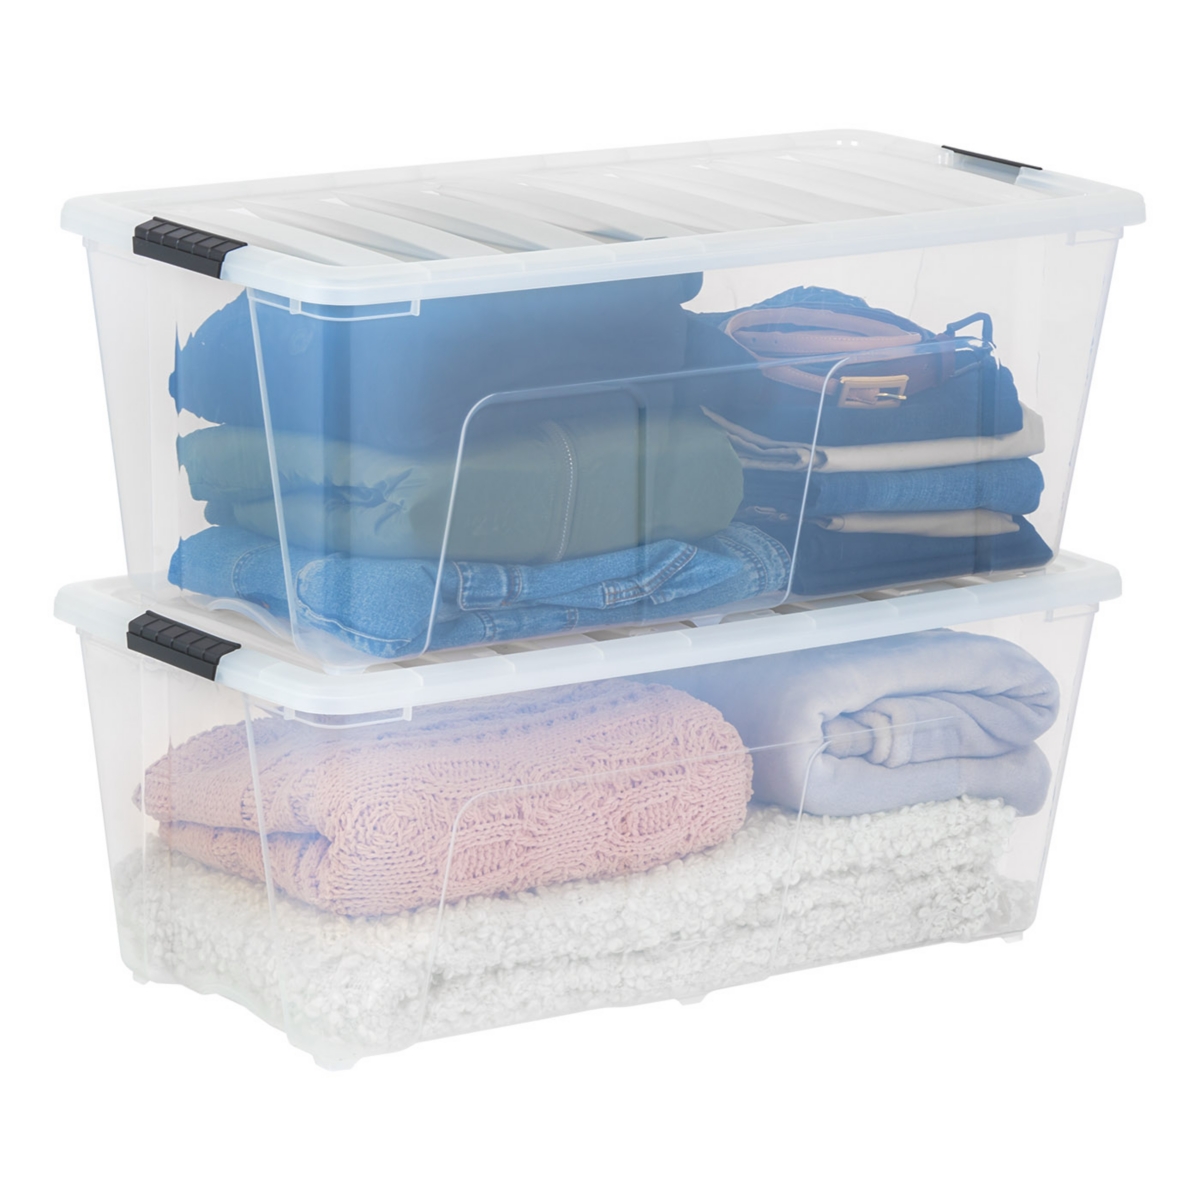 2 Pack 84qt Clear View Plastic Storage Bin with Lid and Secure Latching Buckles